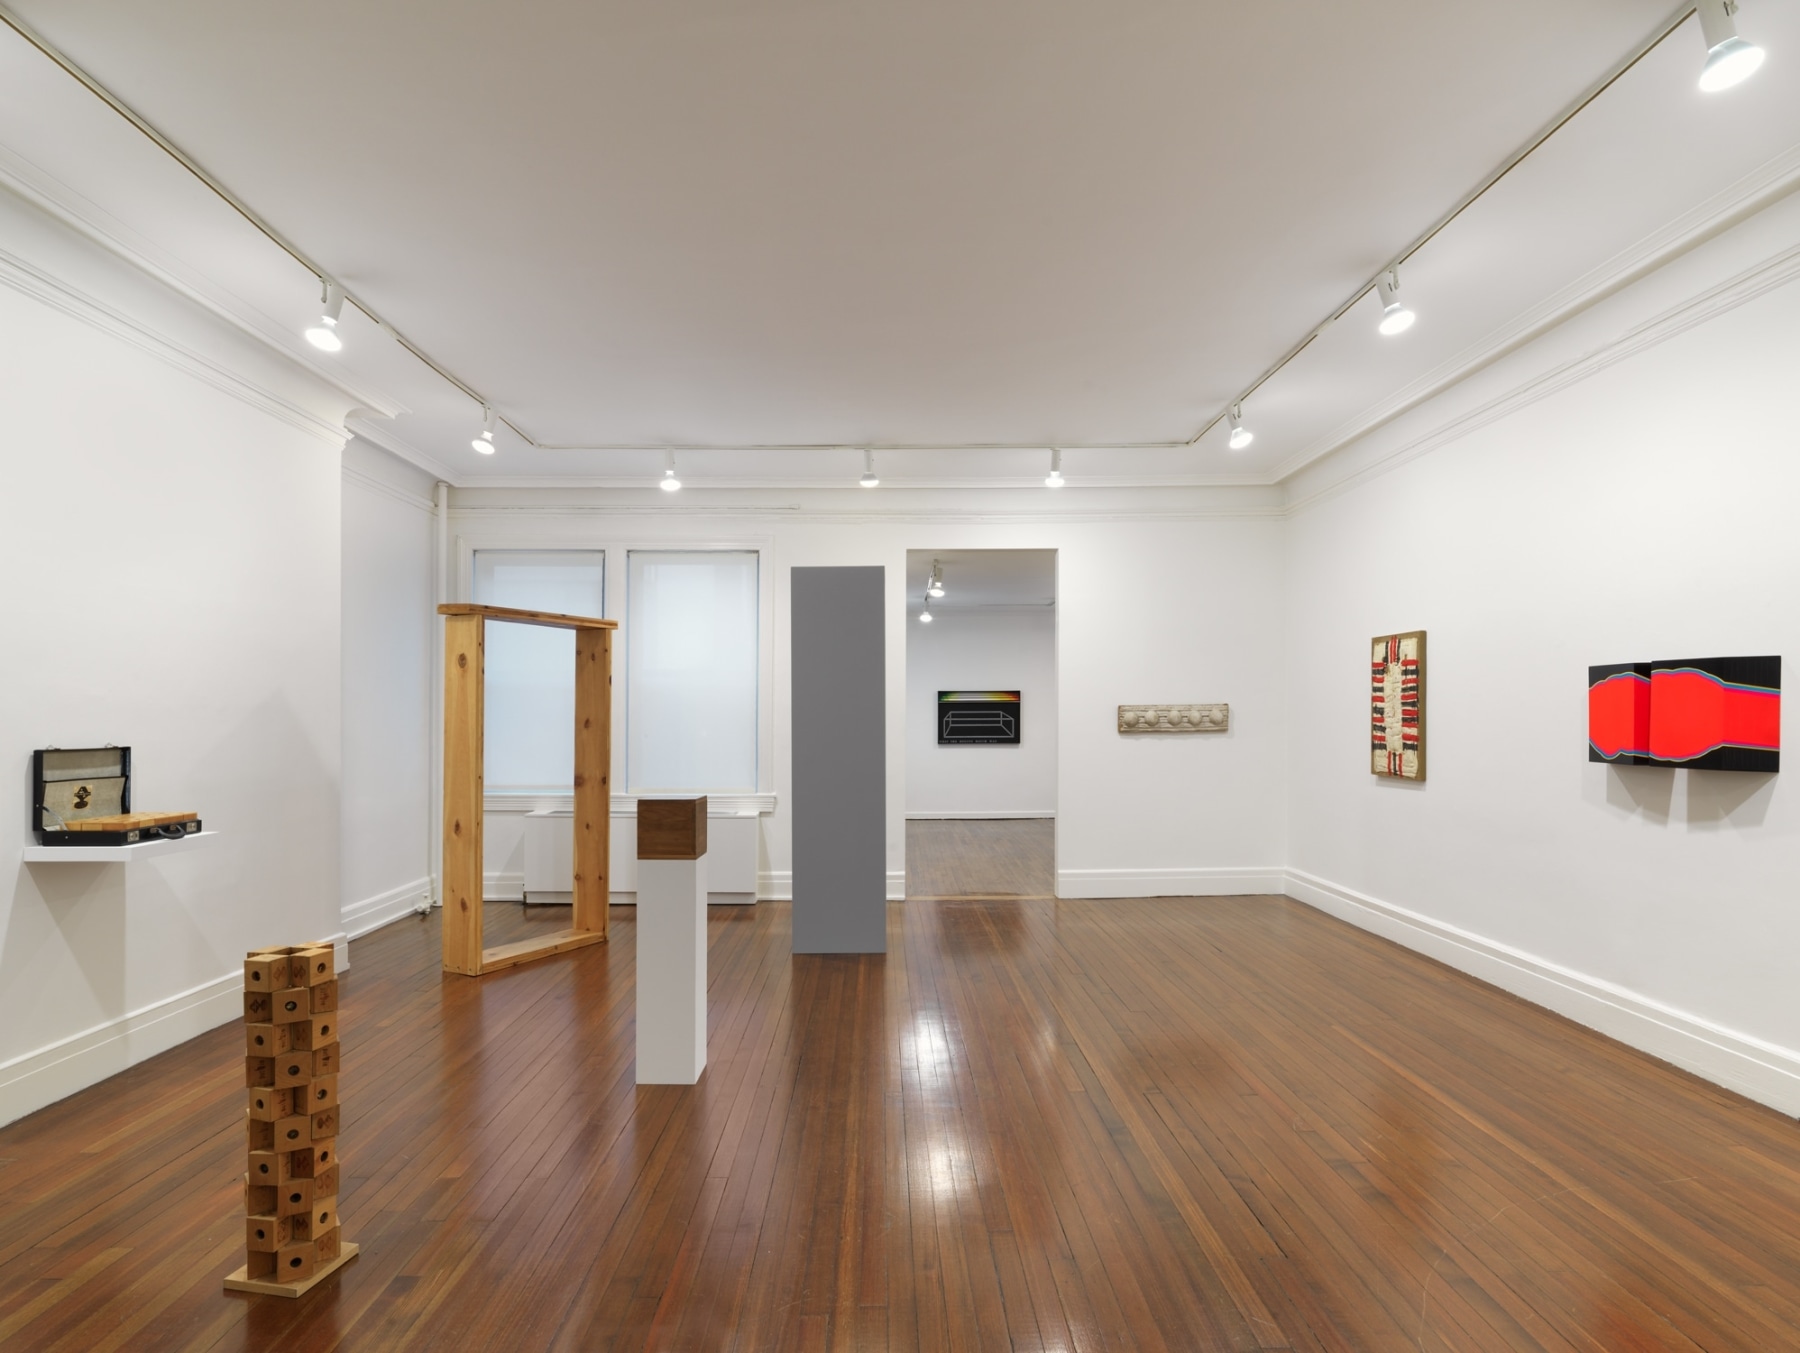 Installation view, 1963&mdash;Boxing Match, Revisited, 18 EAST 77